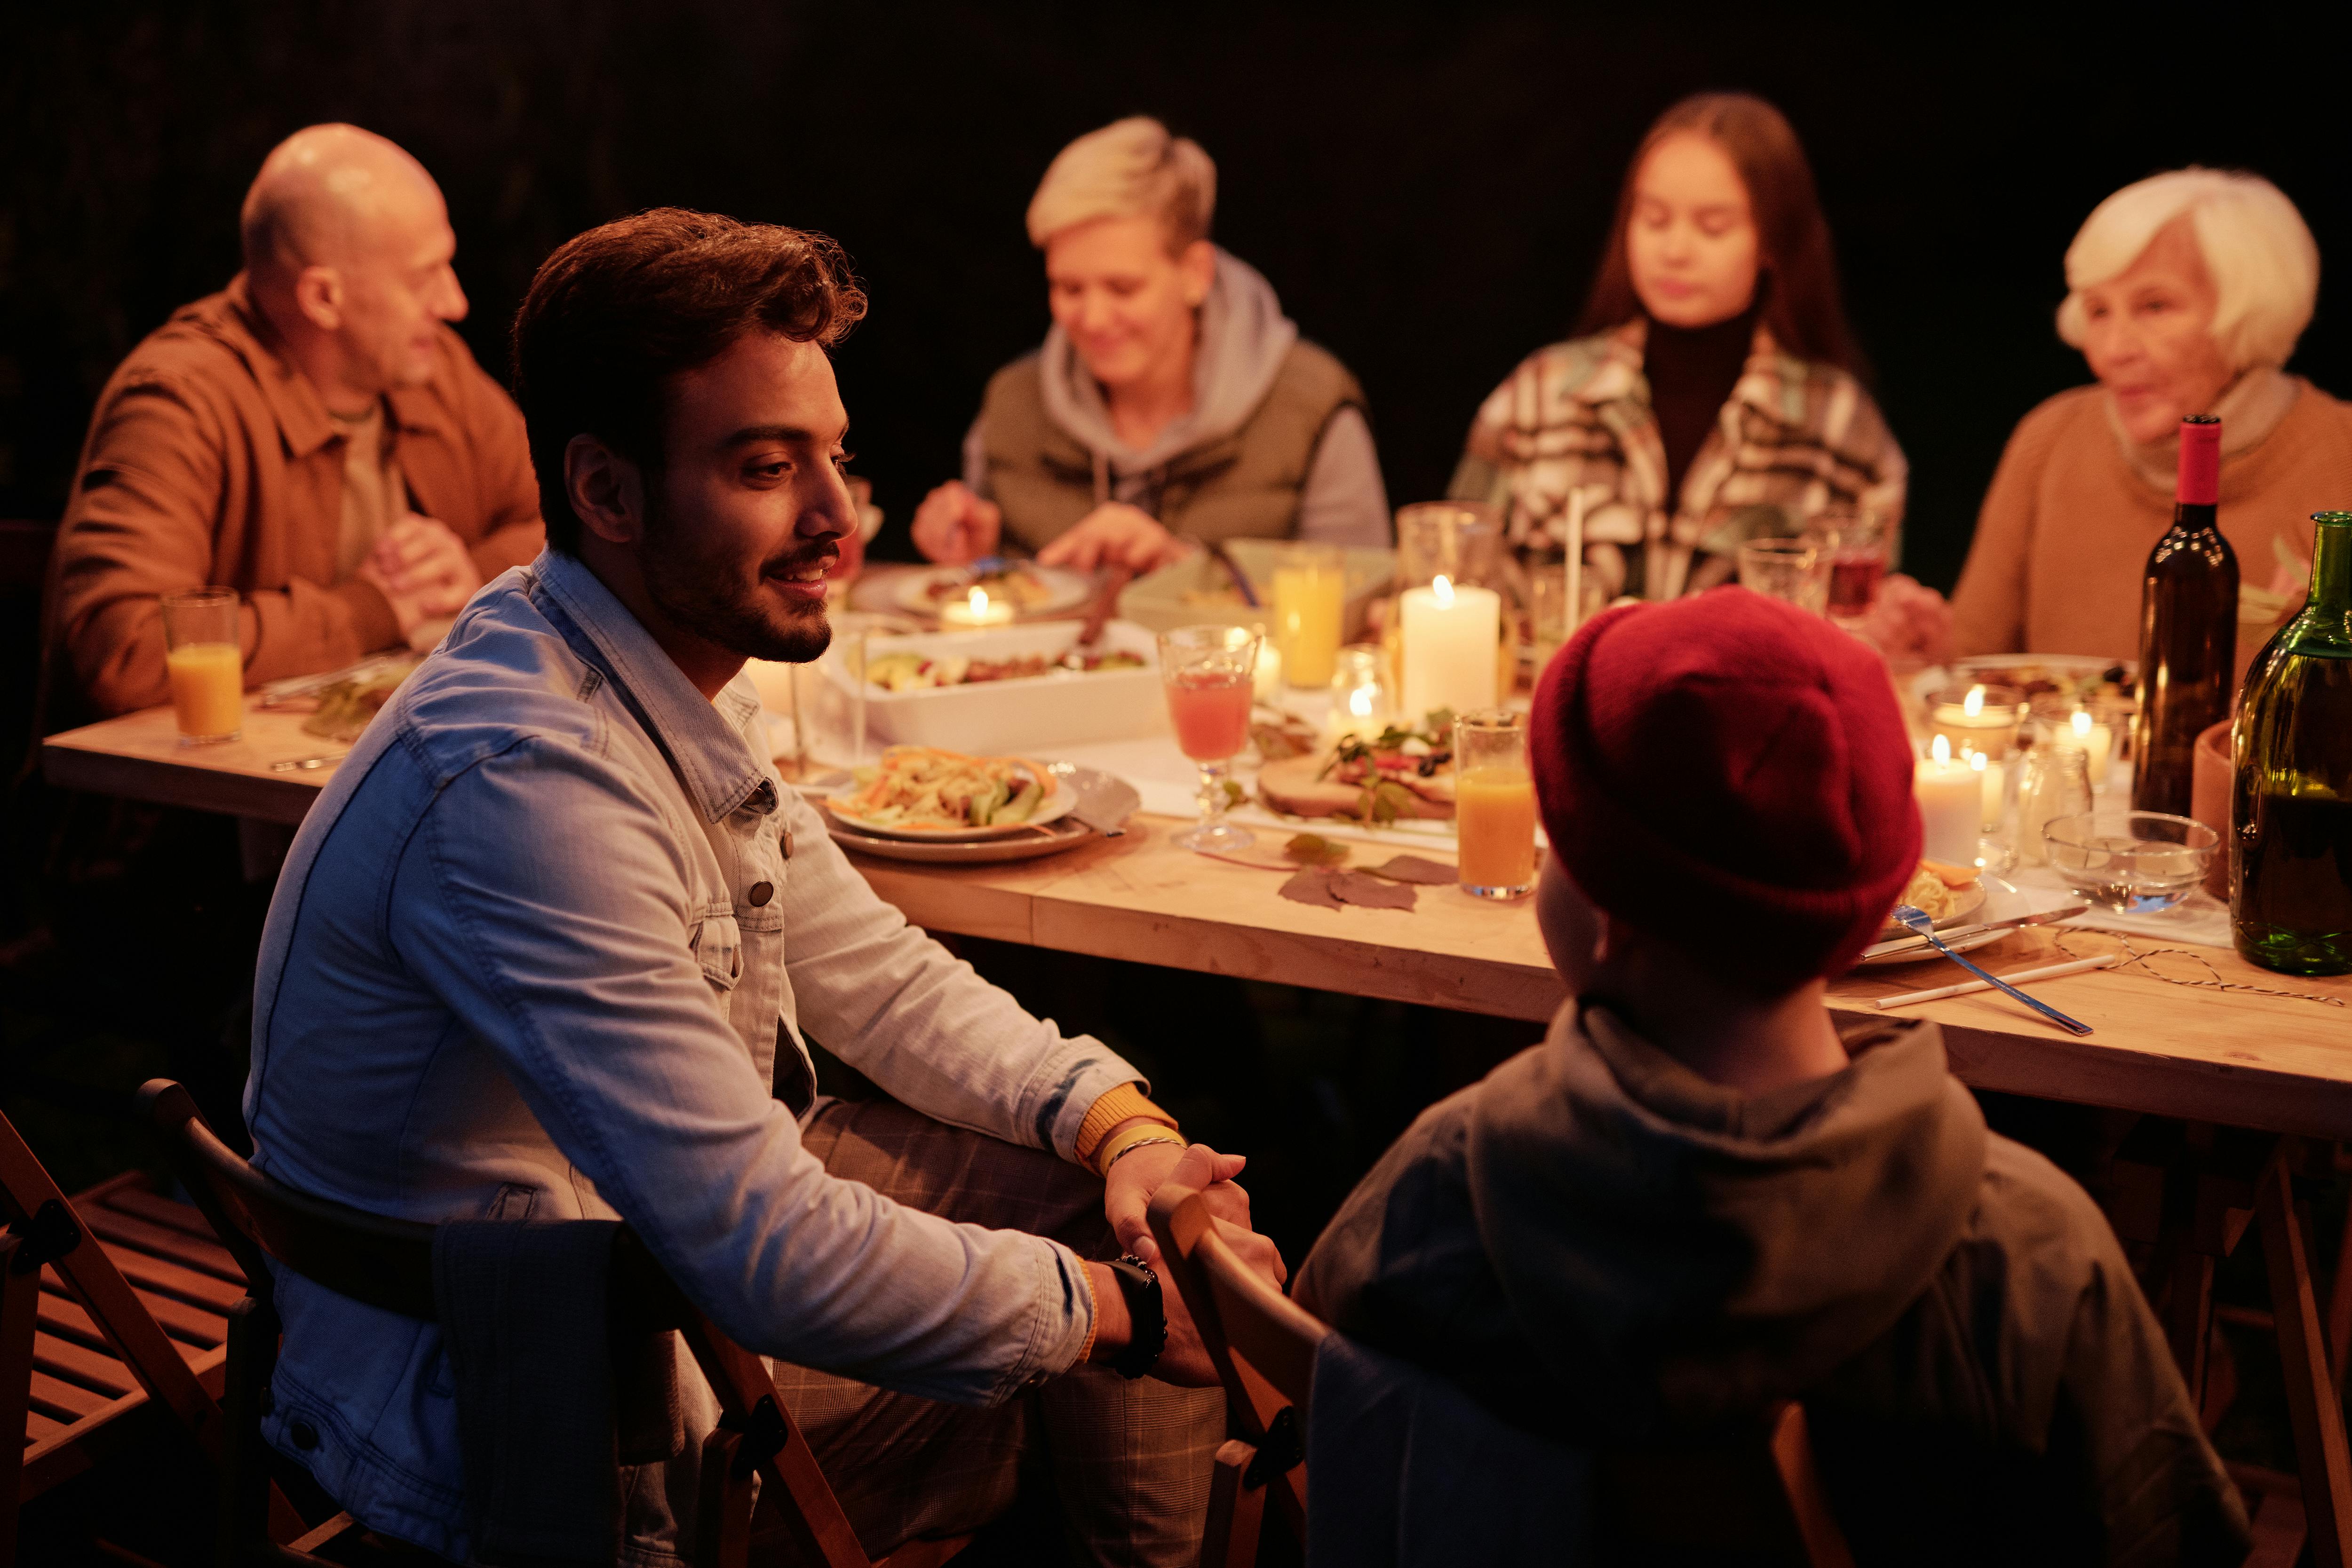 People gathering at dinner in night garden and chatting | Source: Pexels